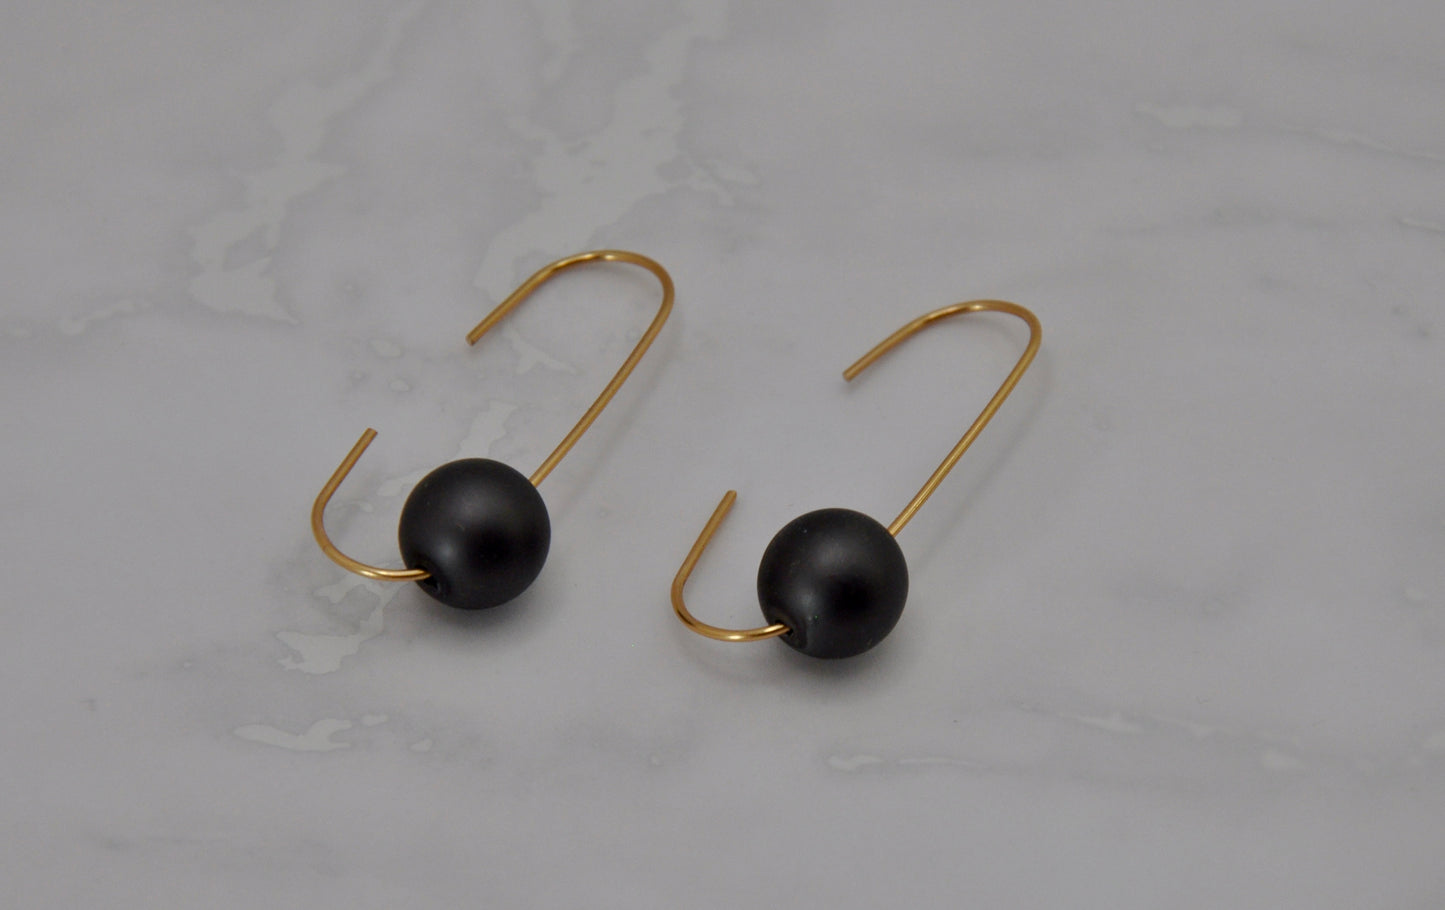 Wire and Black Bead Earrings